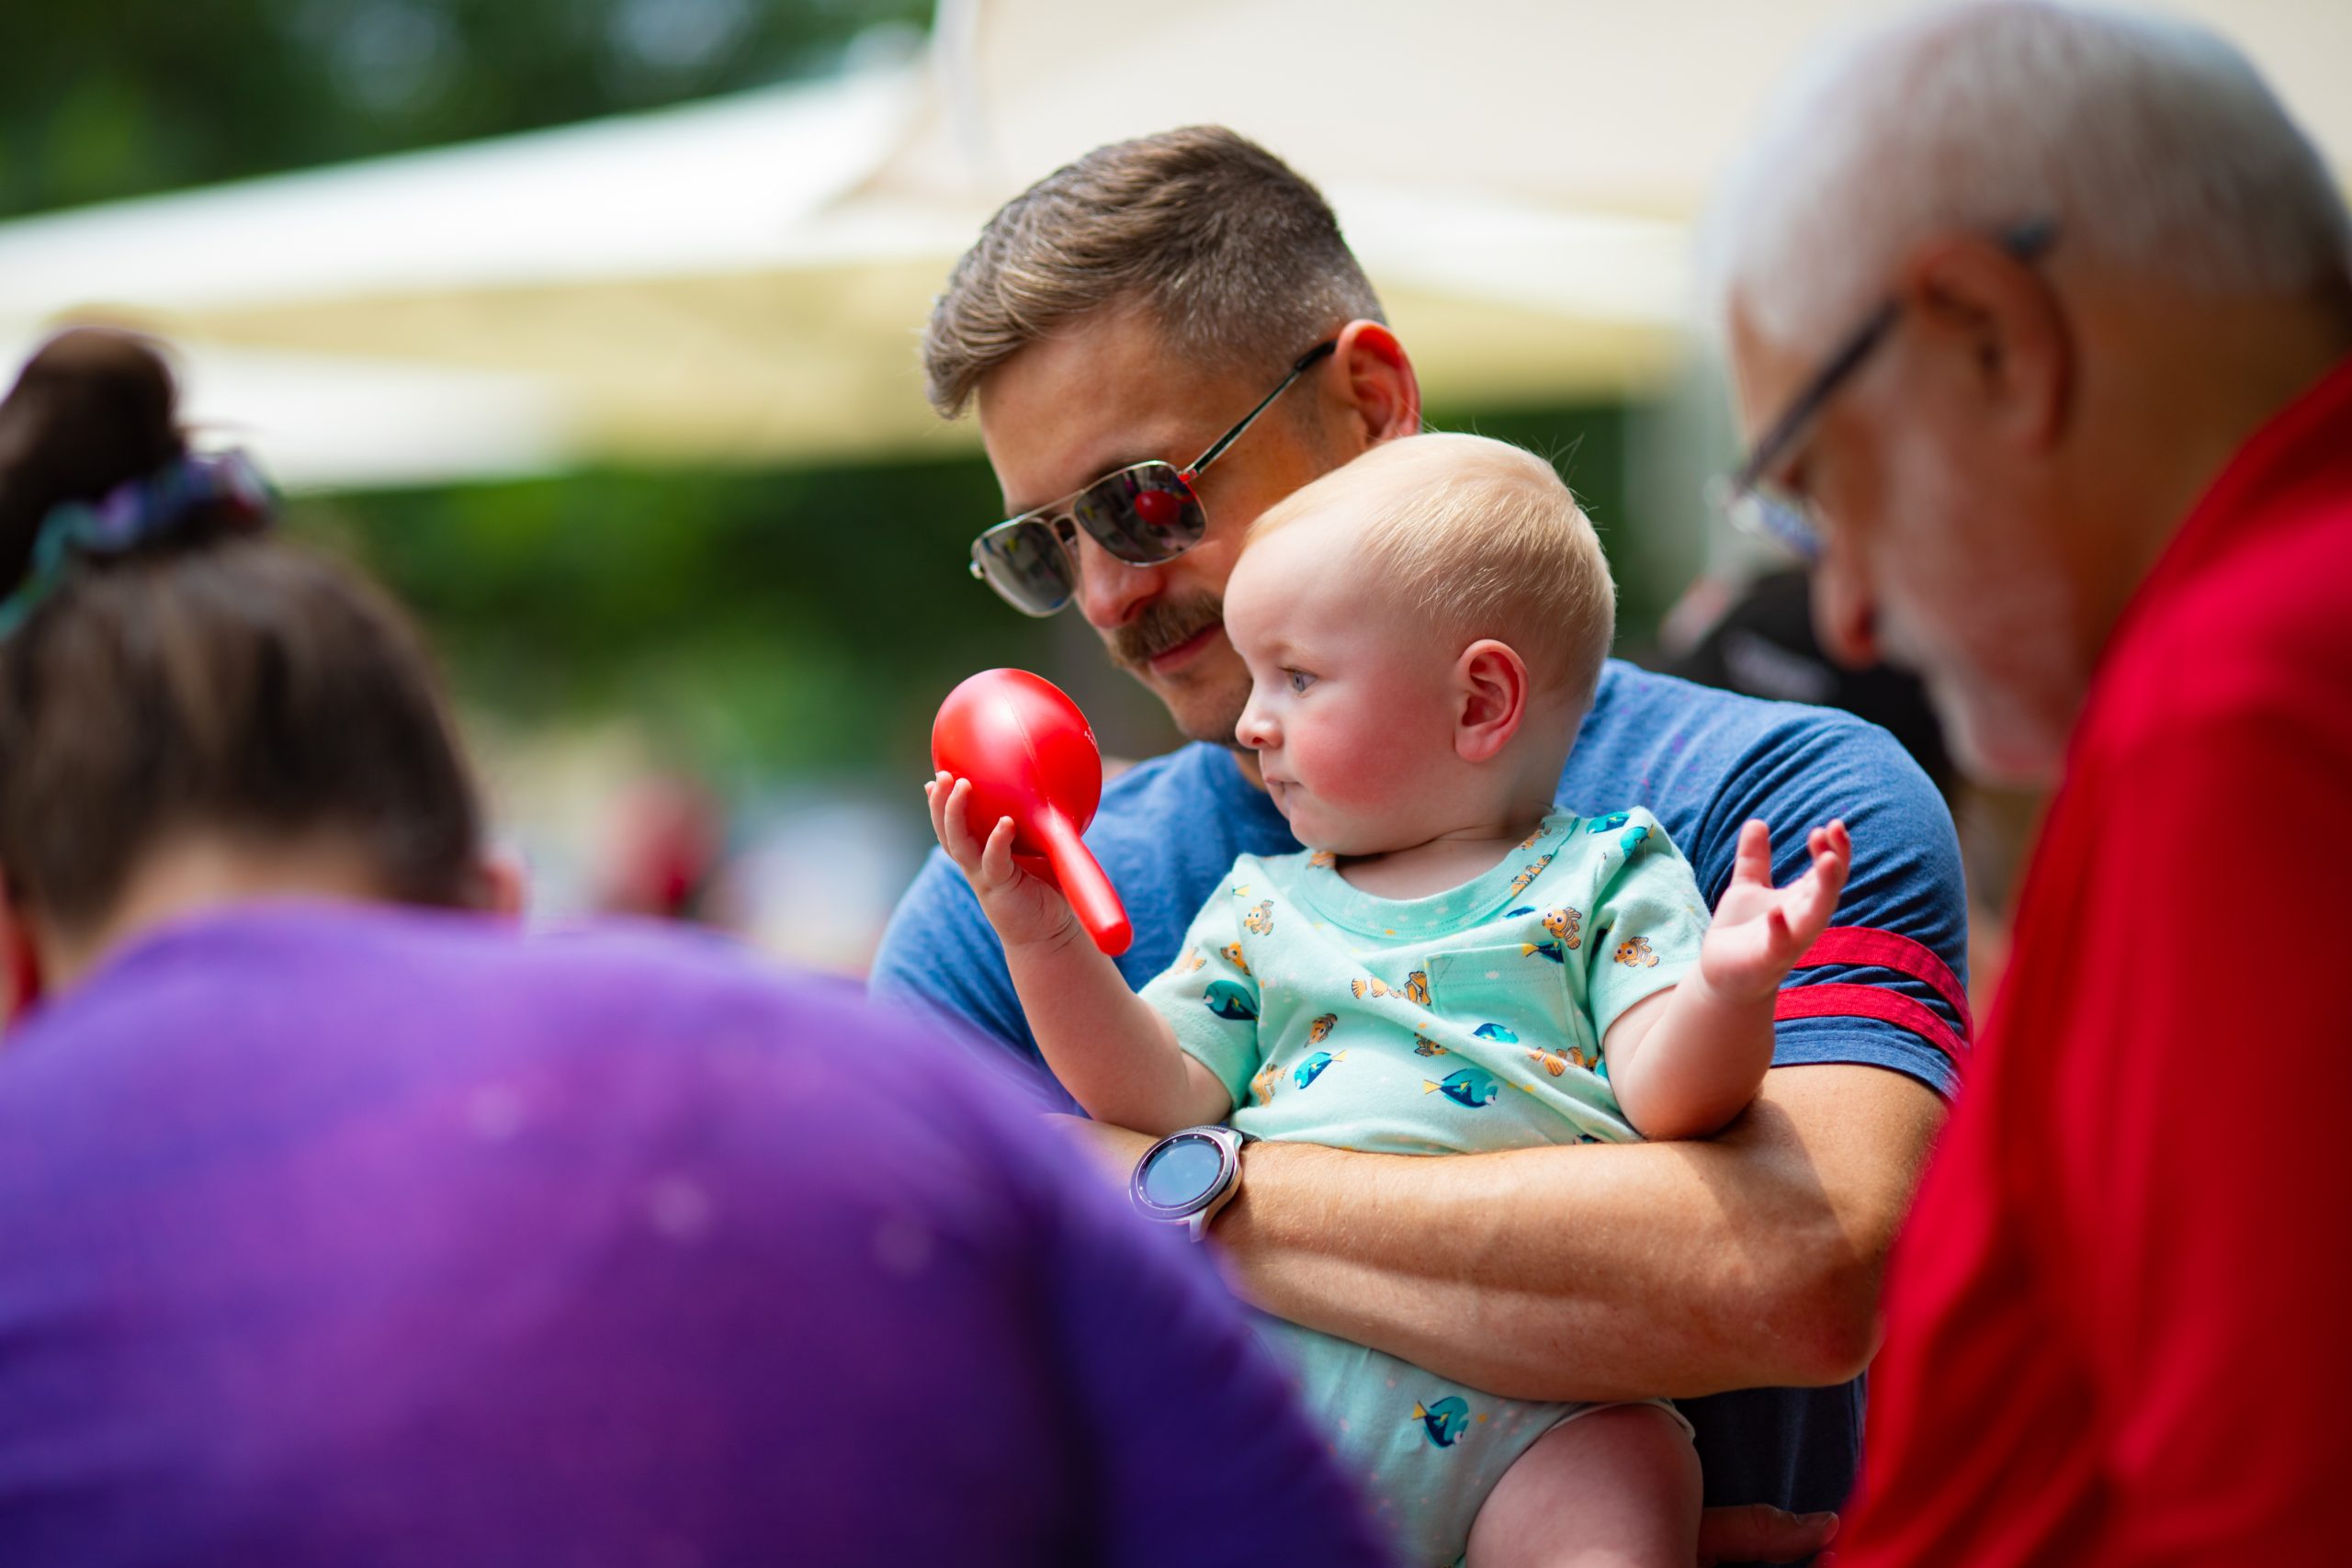 A small child held by father shaking a maraca